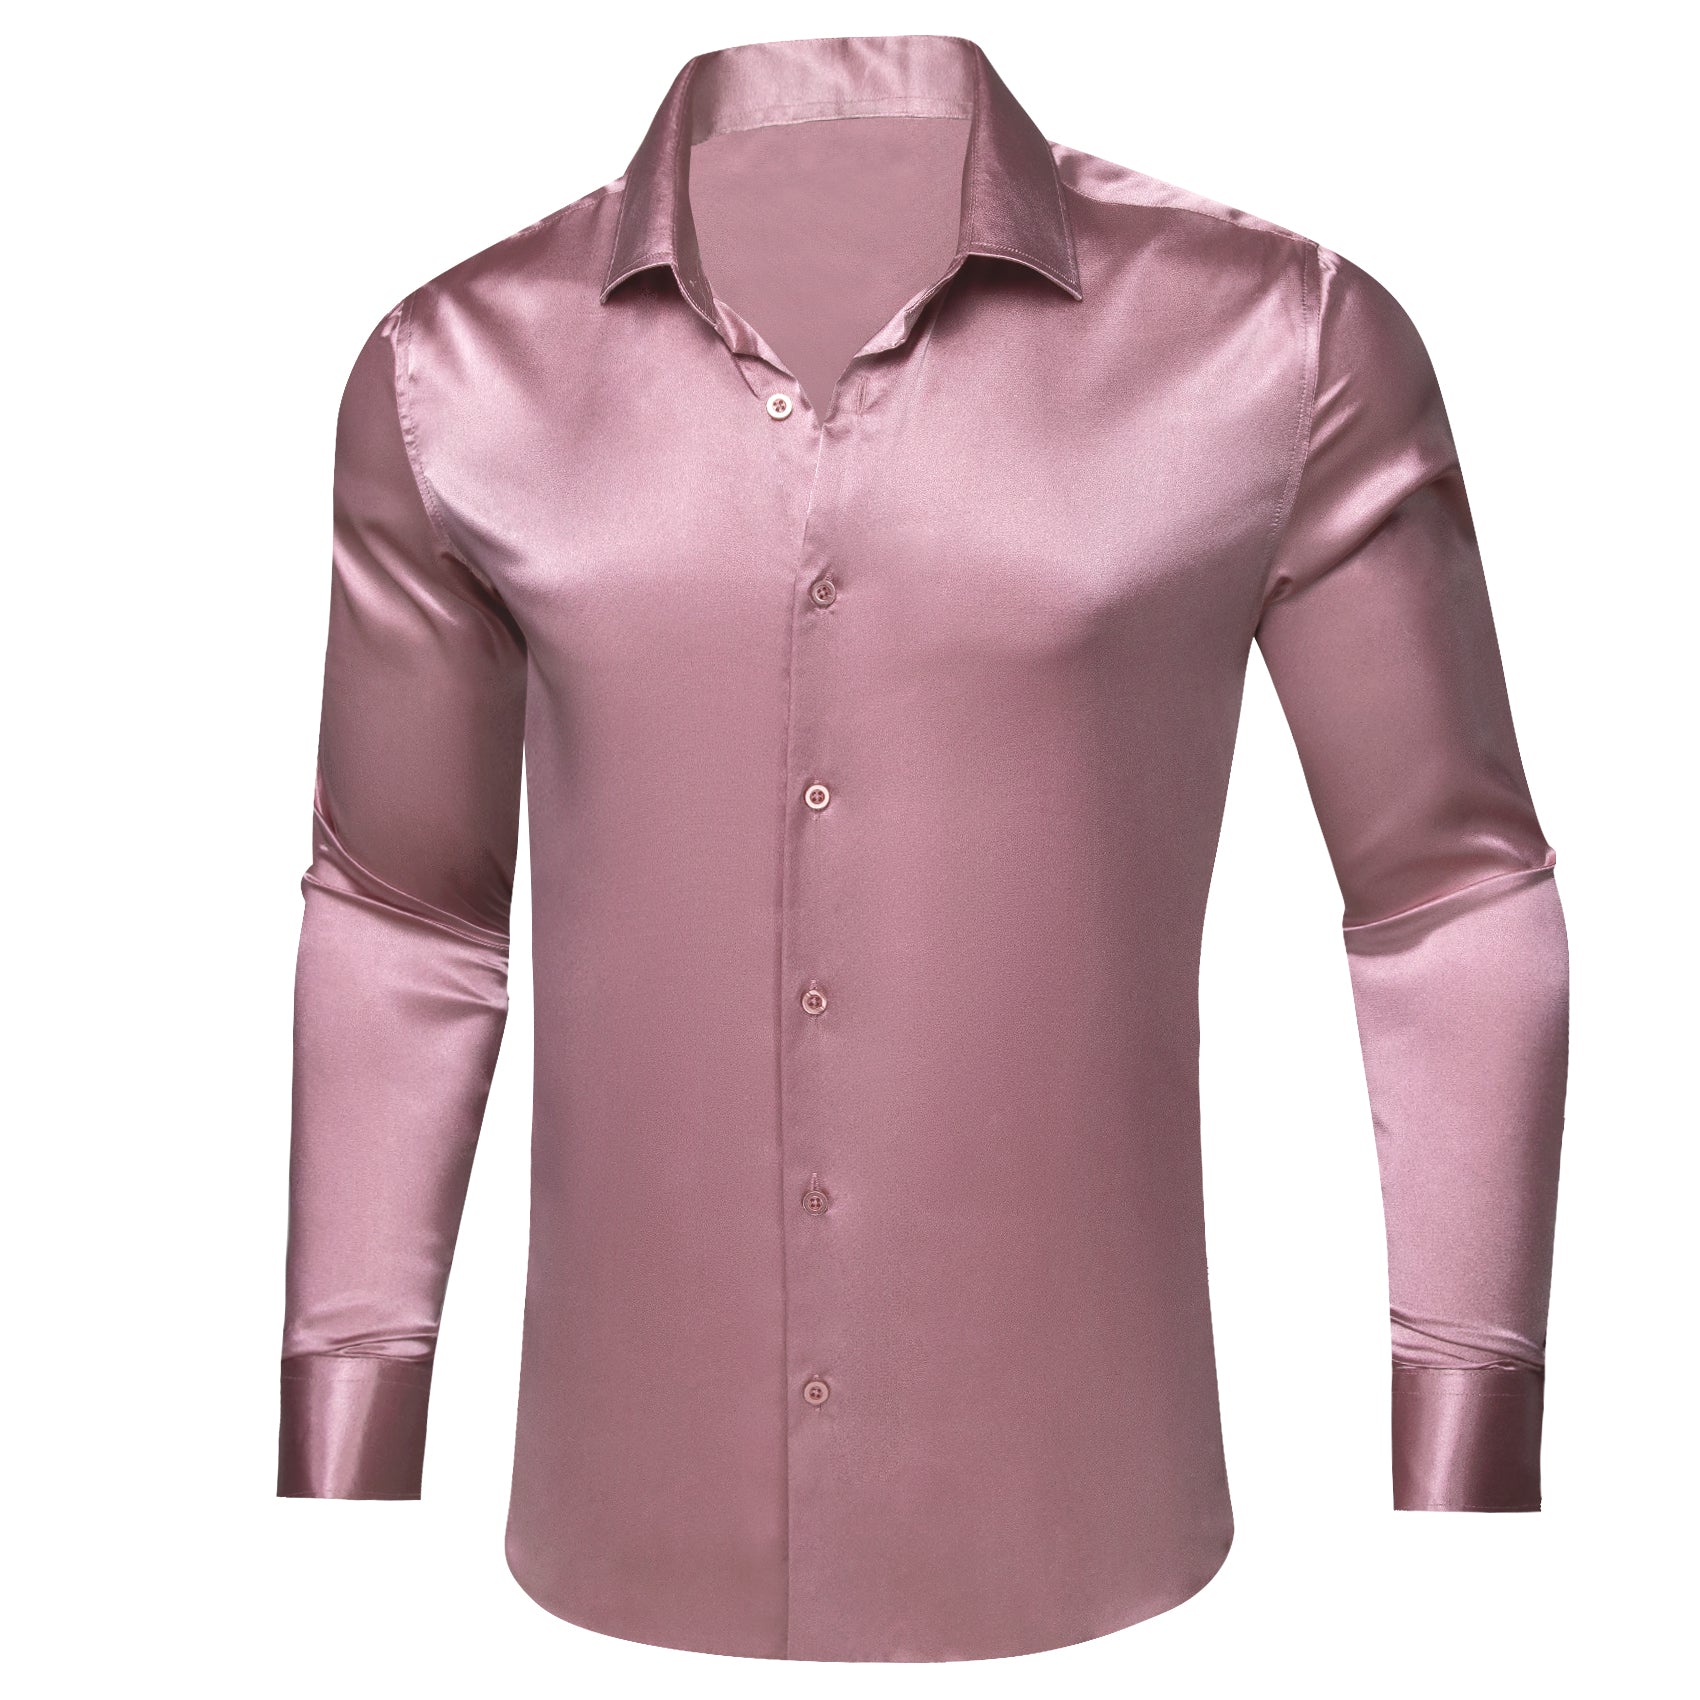 Barry.wang Pale Lavender Solid Silk Shirt